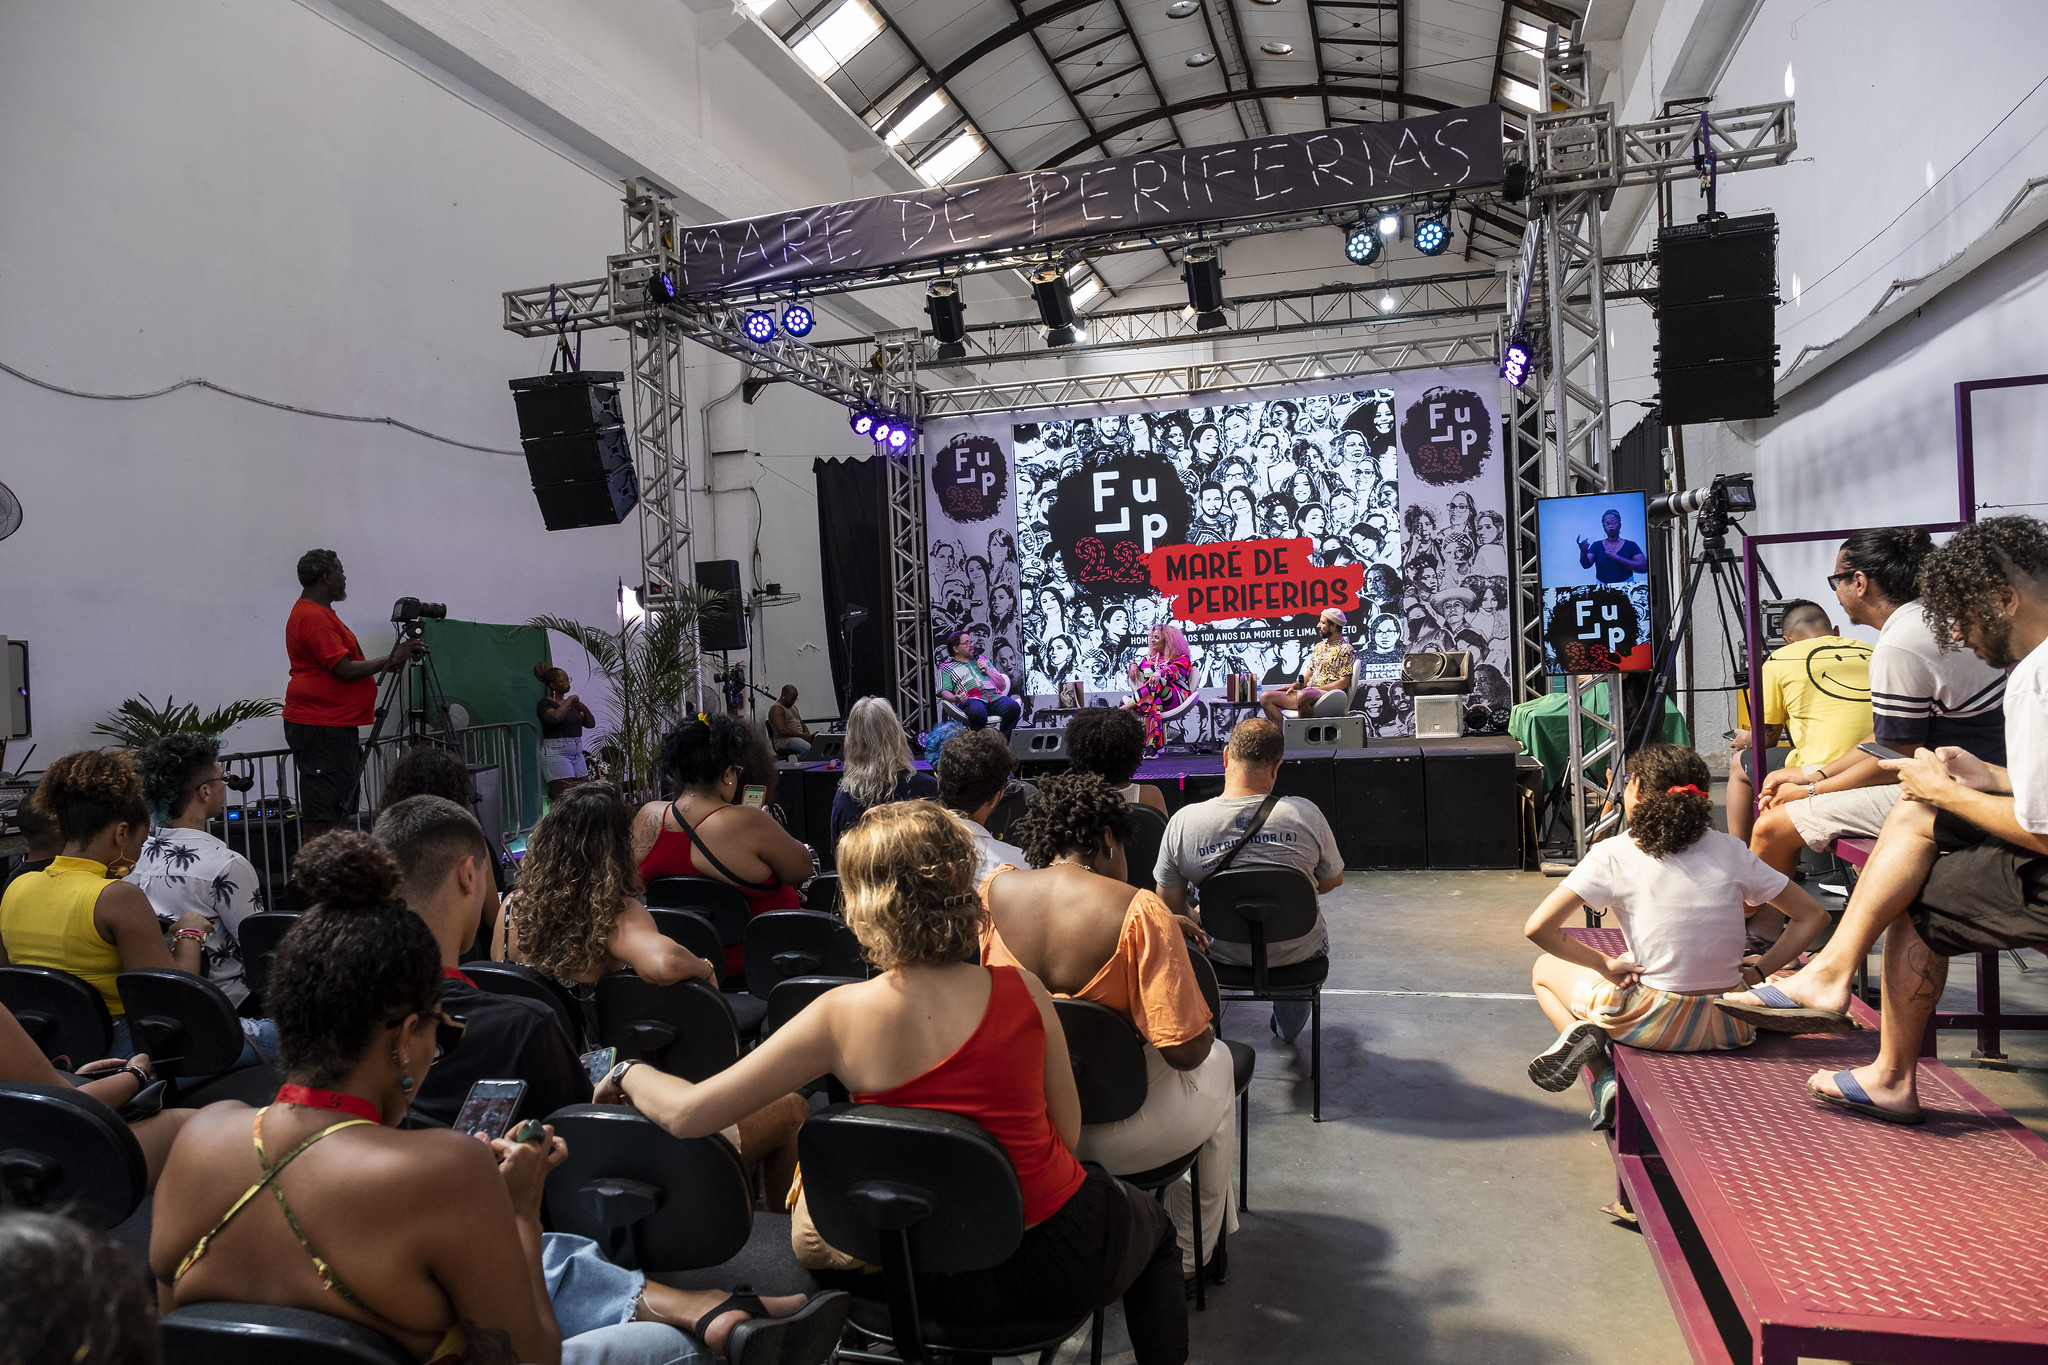 The 12th edition of FLUP took place at the Maré Arts Center in Nova Holanda from December 5 to 11, 2022. The title for FLUP 2022 was Maré de Periferias. Photo: FLUP Collection